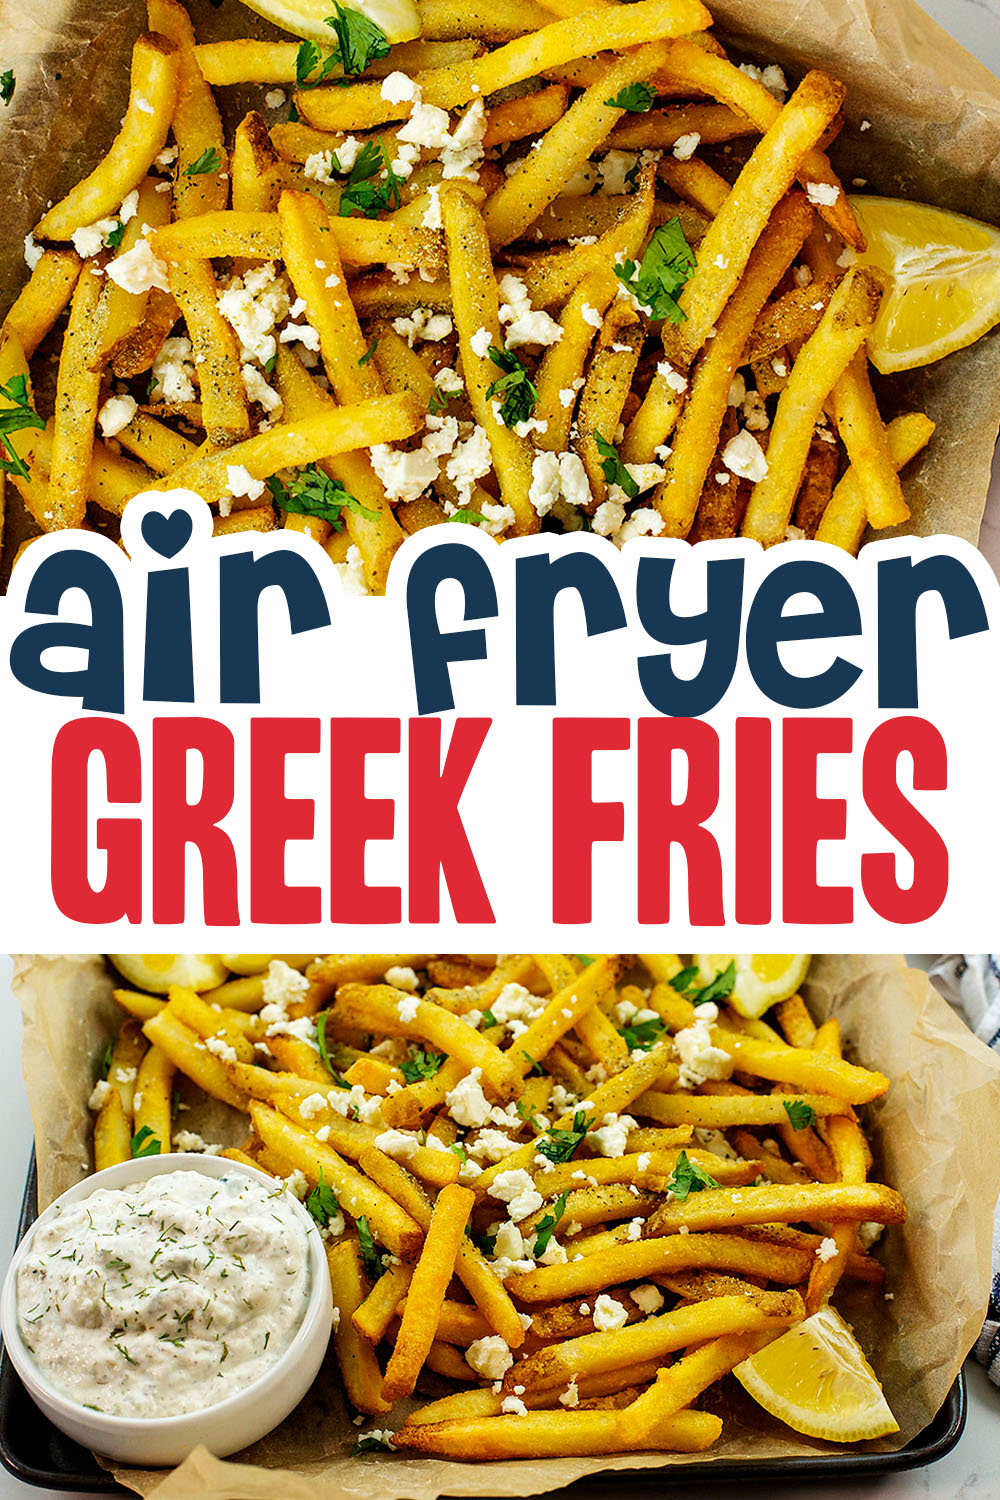 Greek fries are simple to make in the air fryer!  I love dipping these in tzatziki sauce!